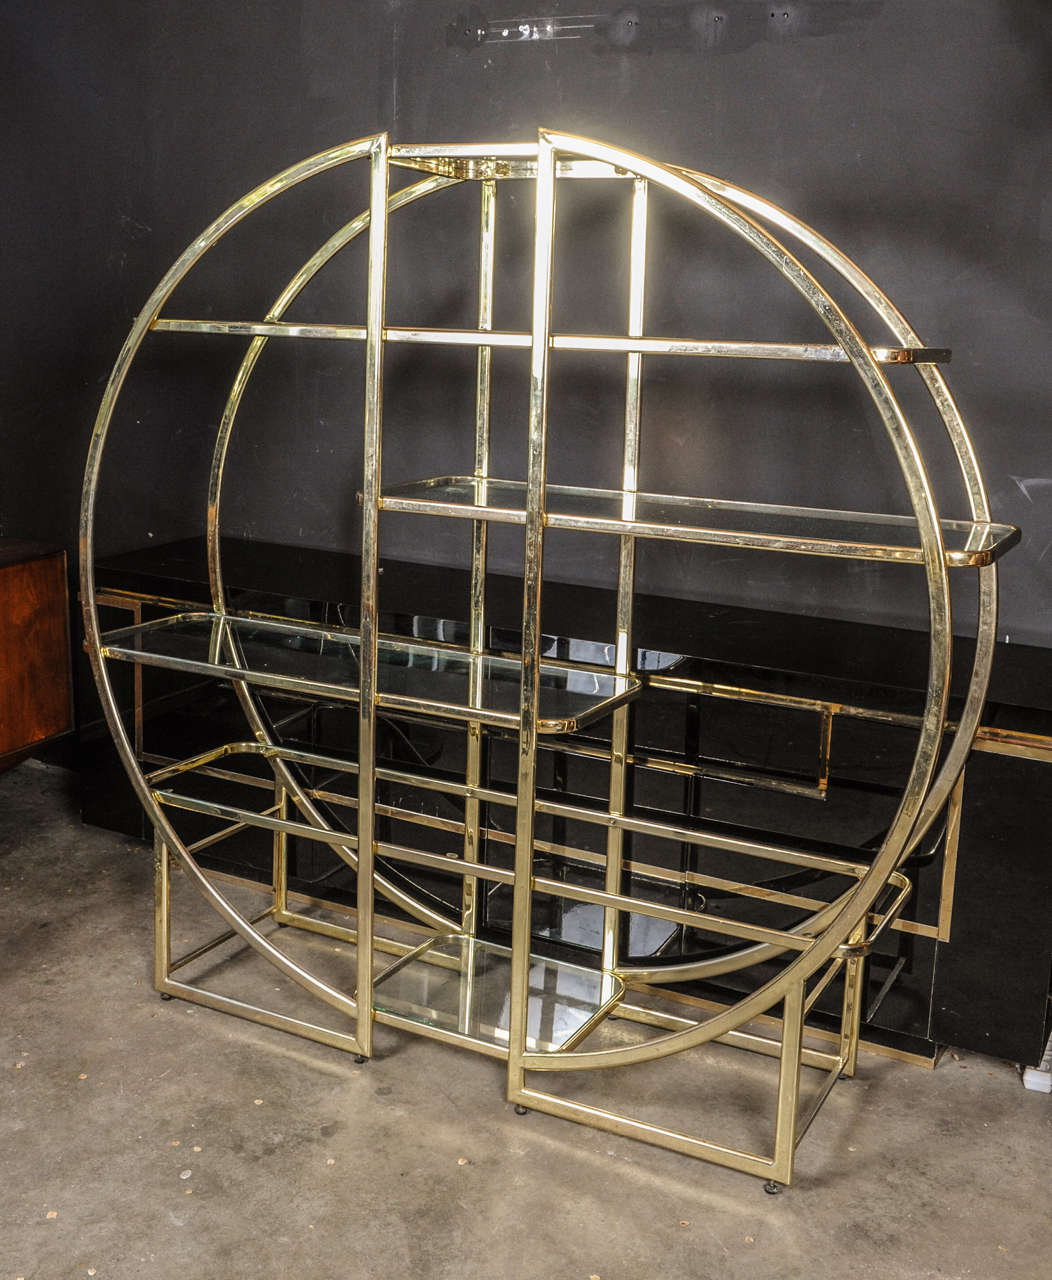 Beautifully shaped round edged book case / etagere / vitrine made of brass and with glass shelves. To be used against a wall or as a stand alone room divider.